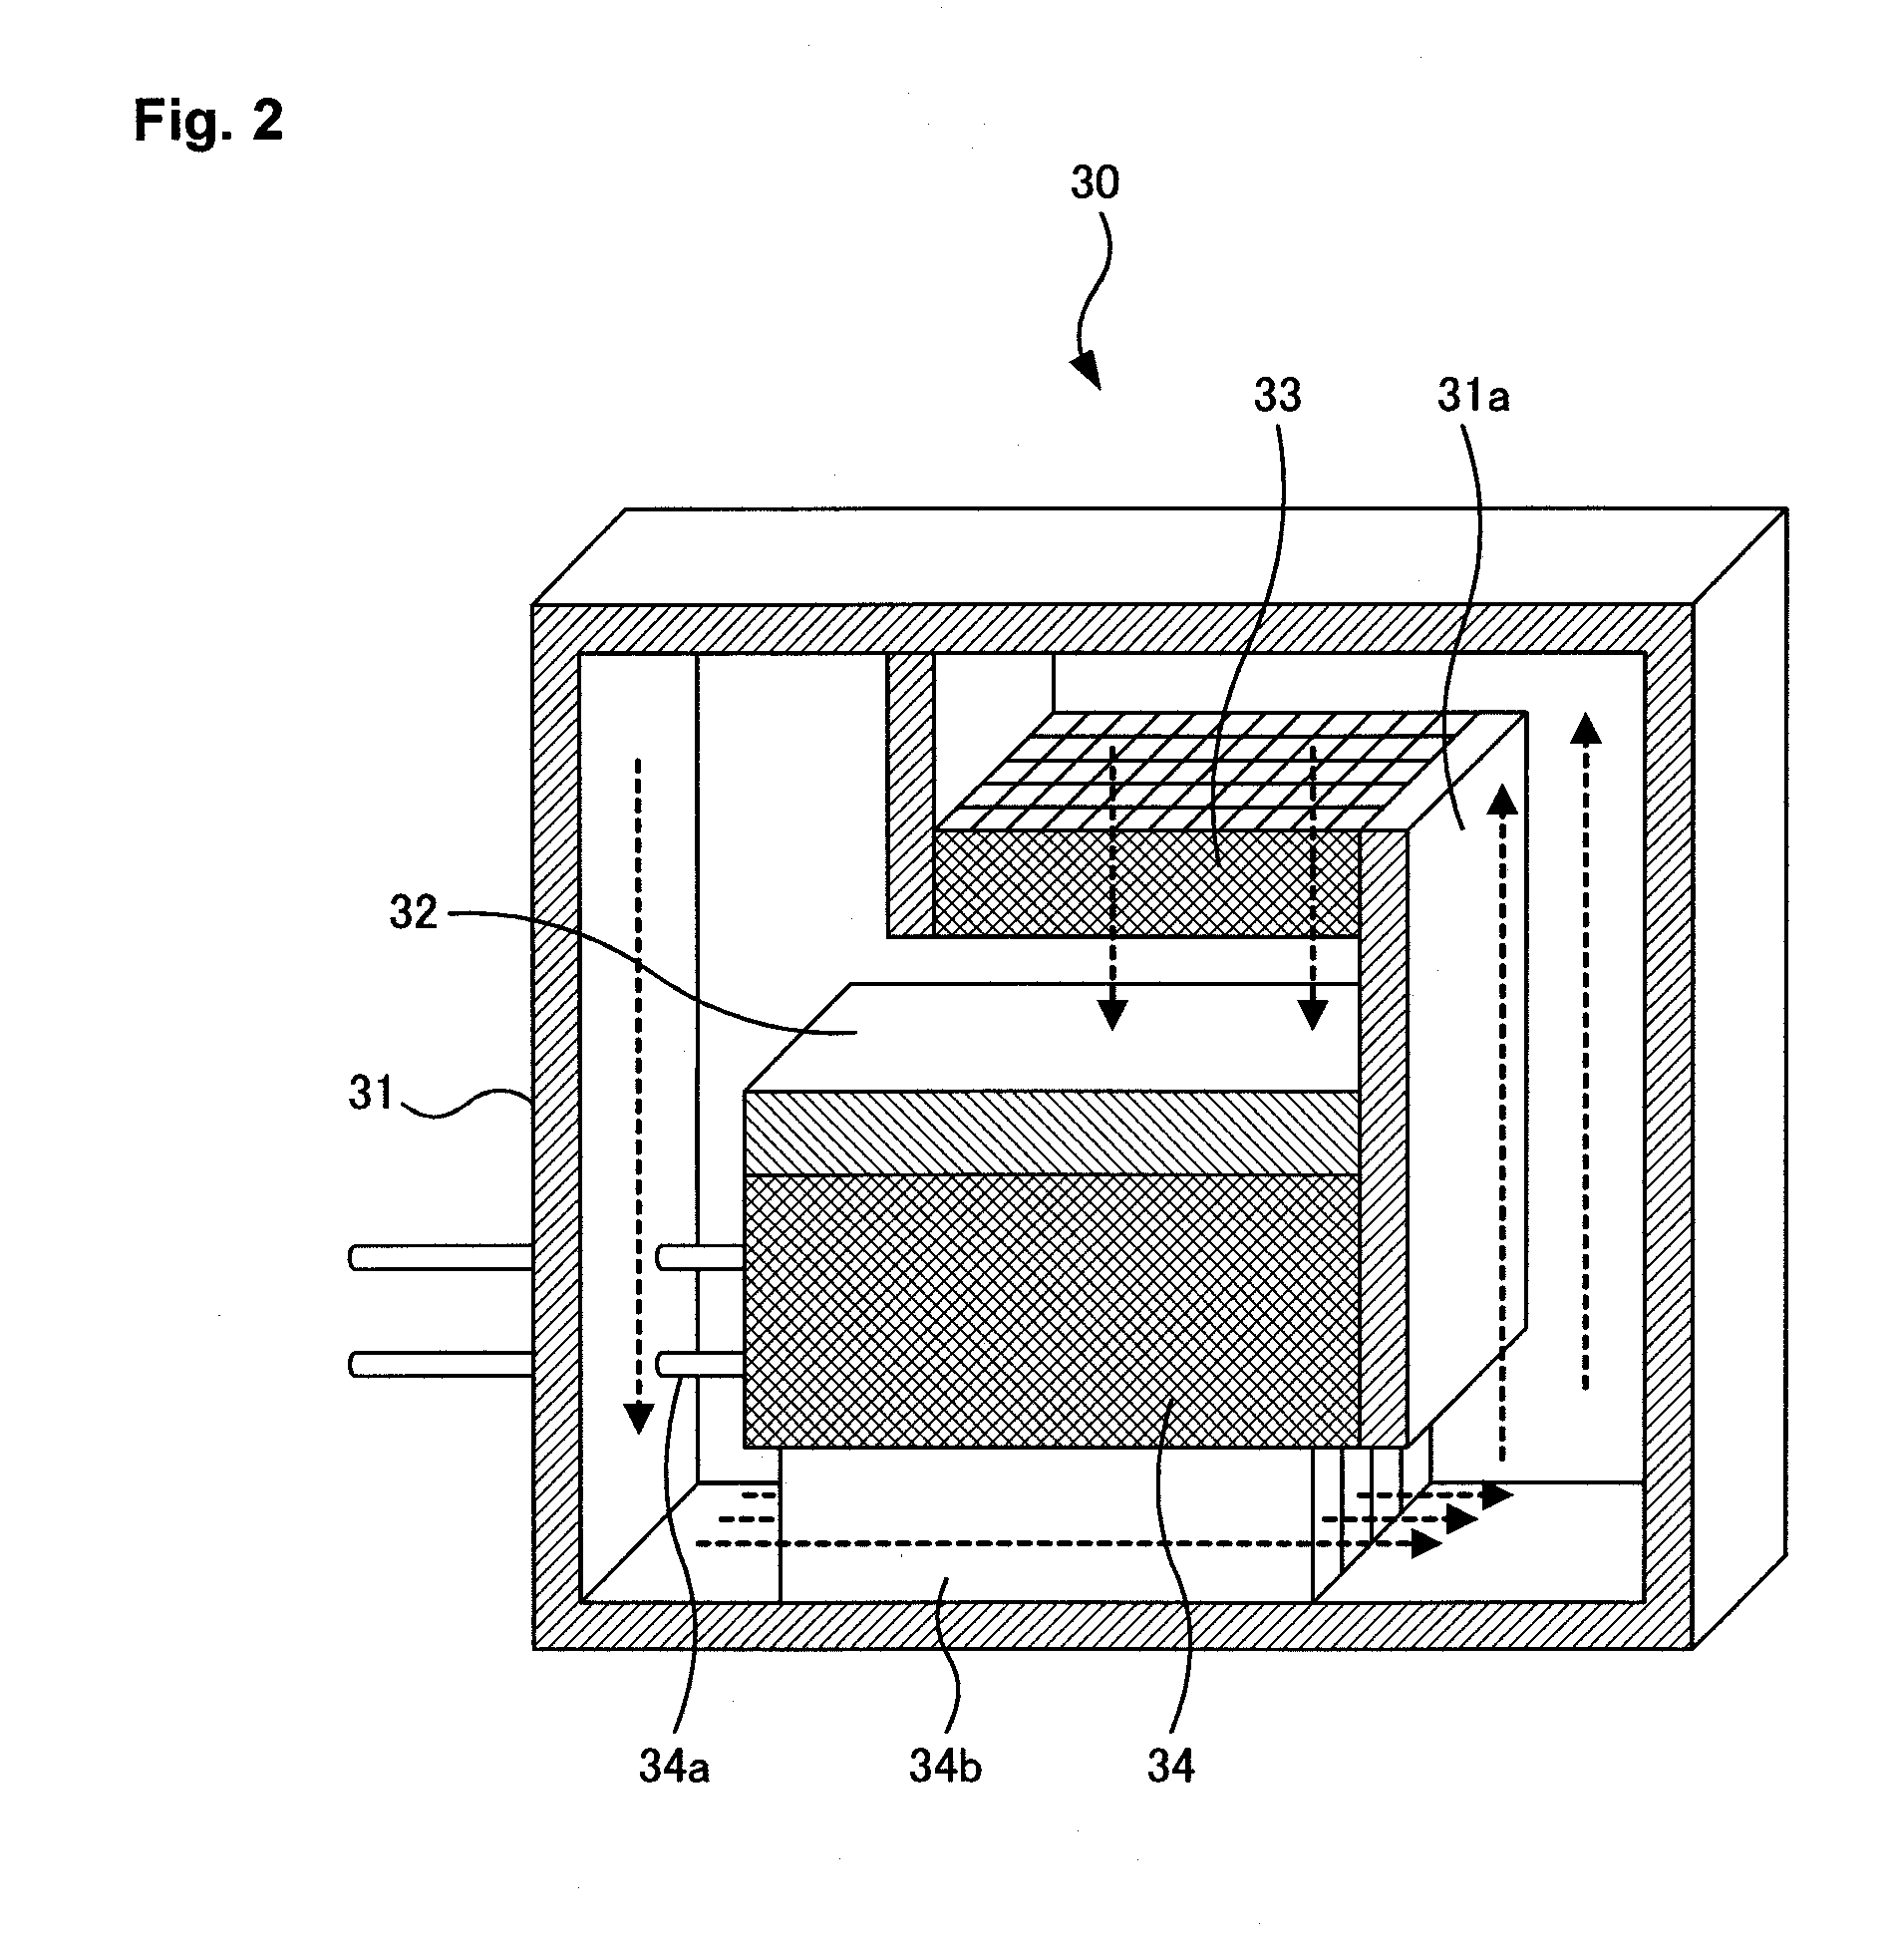 High-frequency power supply for plasma and icp optical emission spectrometer using the same